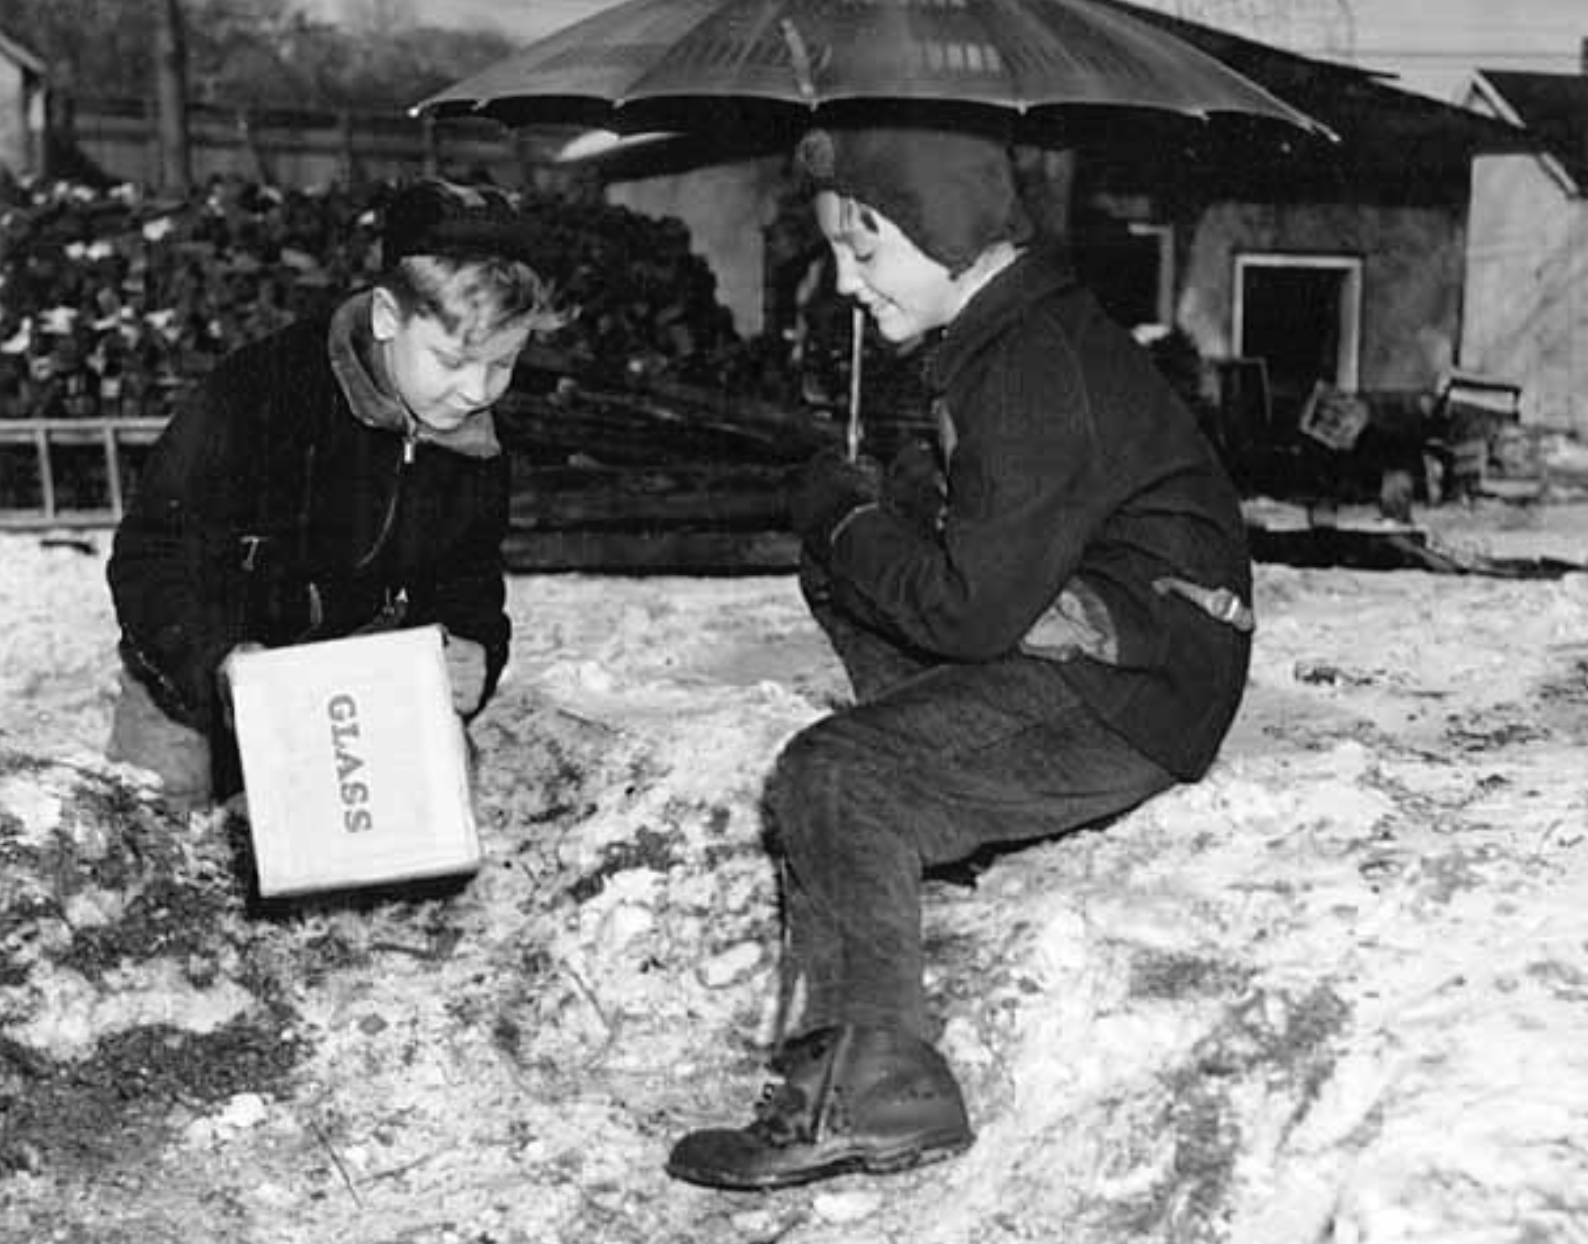 Boys with box and umbrella waiting for groundhog on Ground Hog's Day, St. Paul.